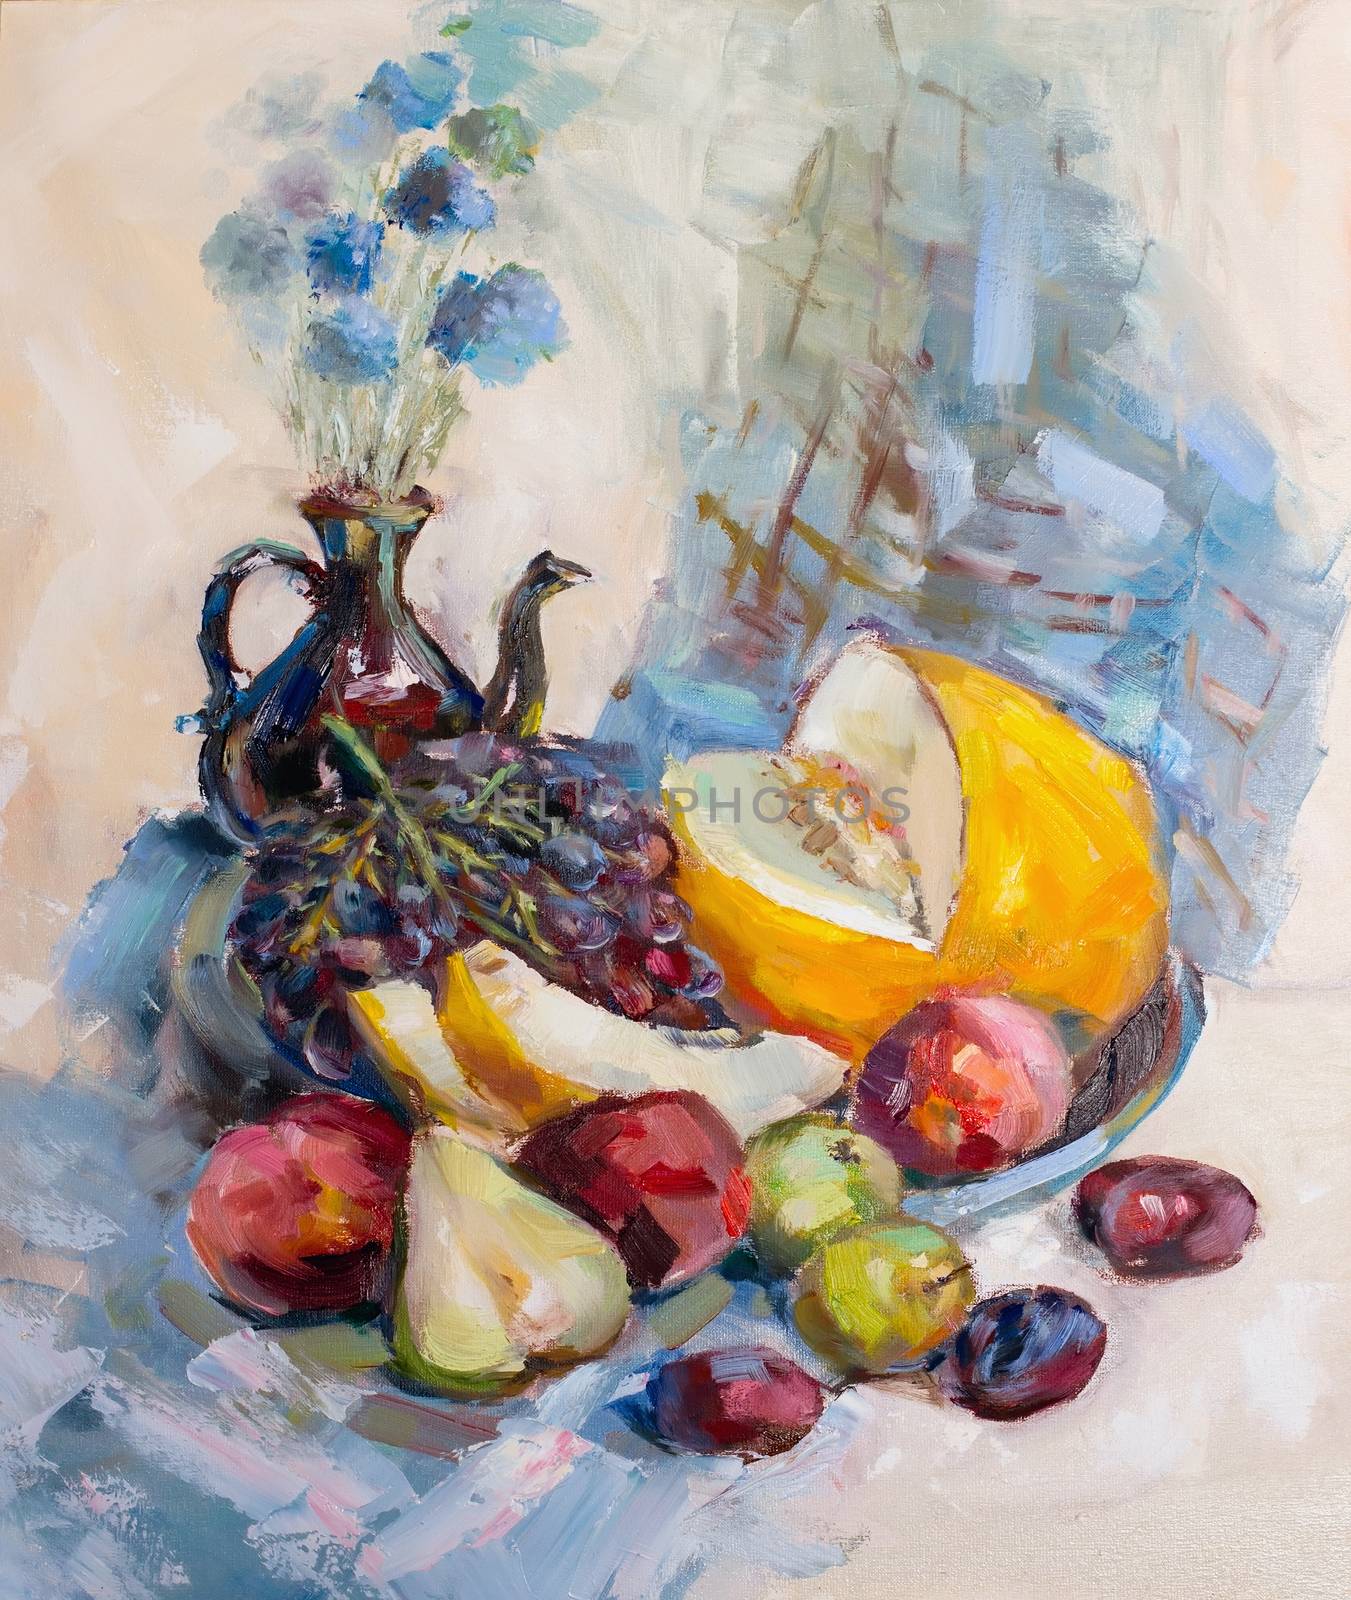 Texture painting oil painting on canvas, abstract oil still life, fine art impressionism, painted color image for wallpaper and backgrounds, the artist painting pattern flowers and fruits and vegetables